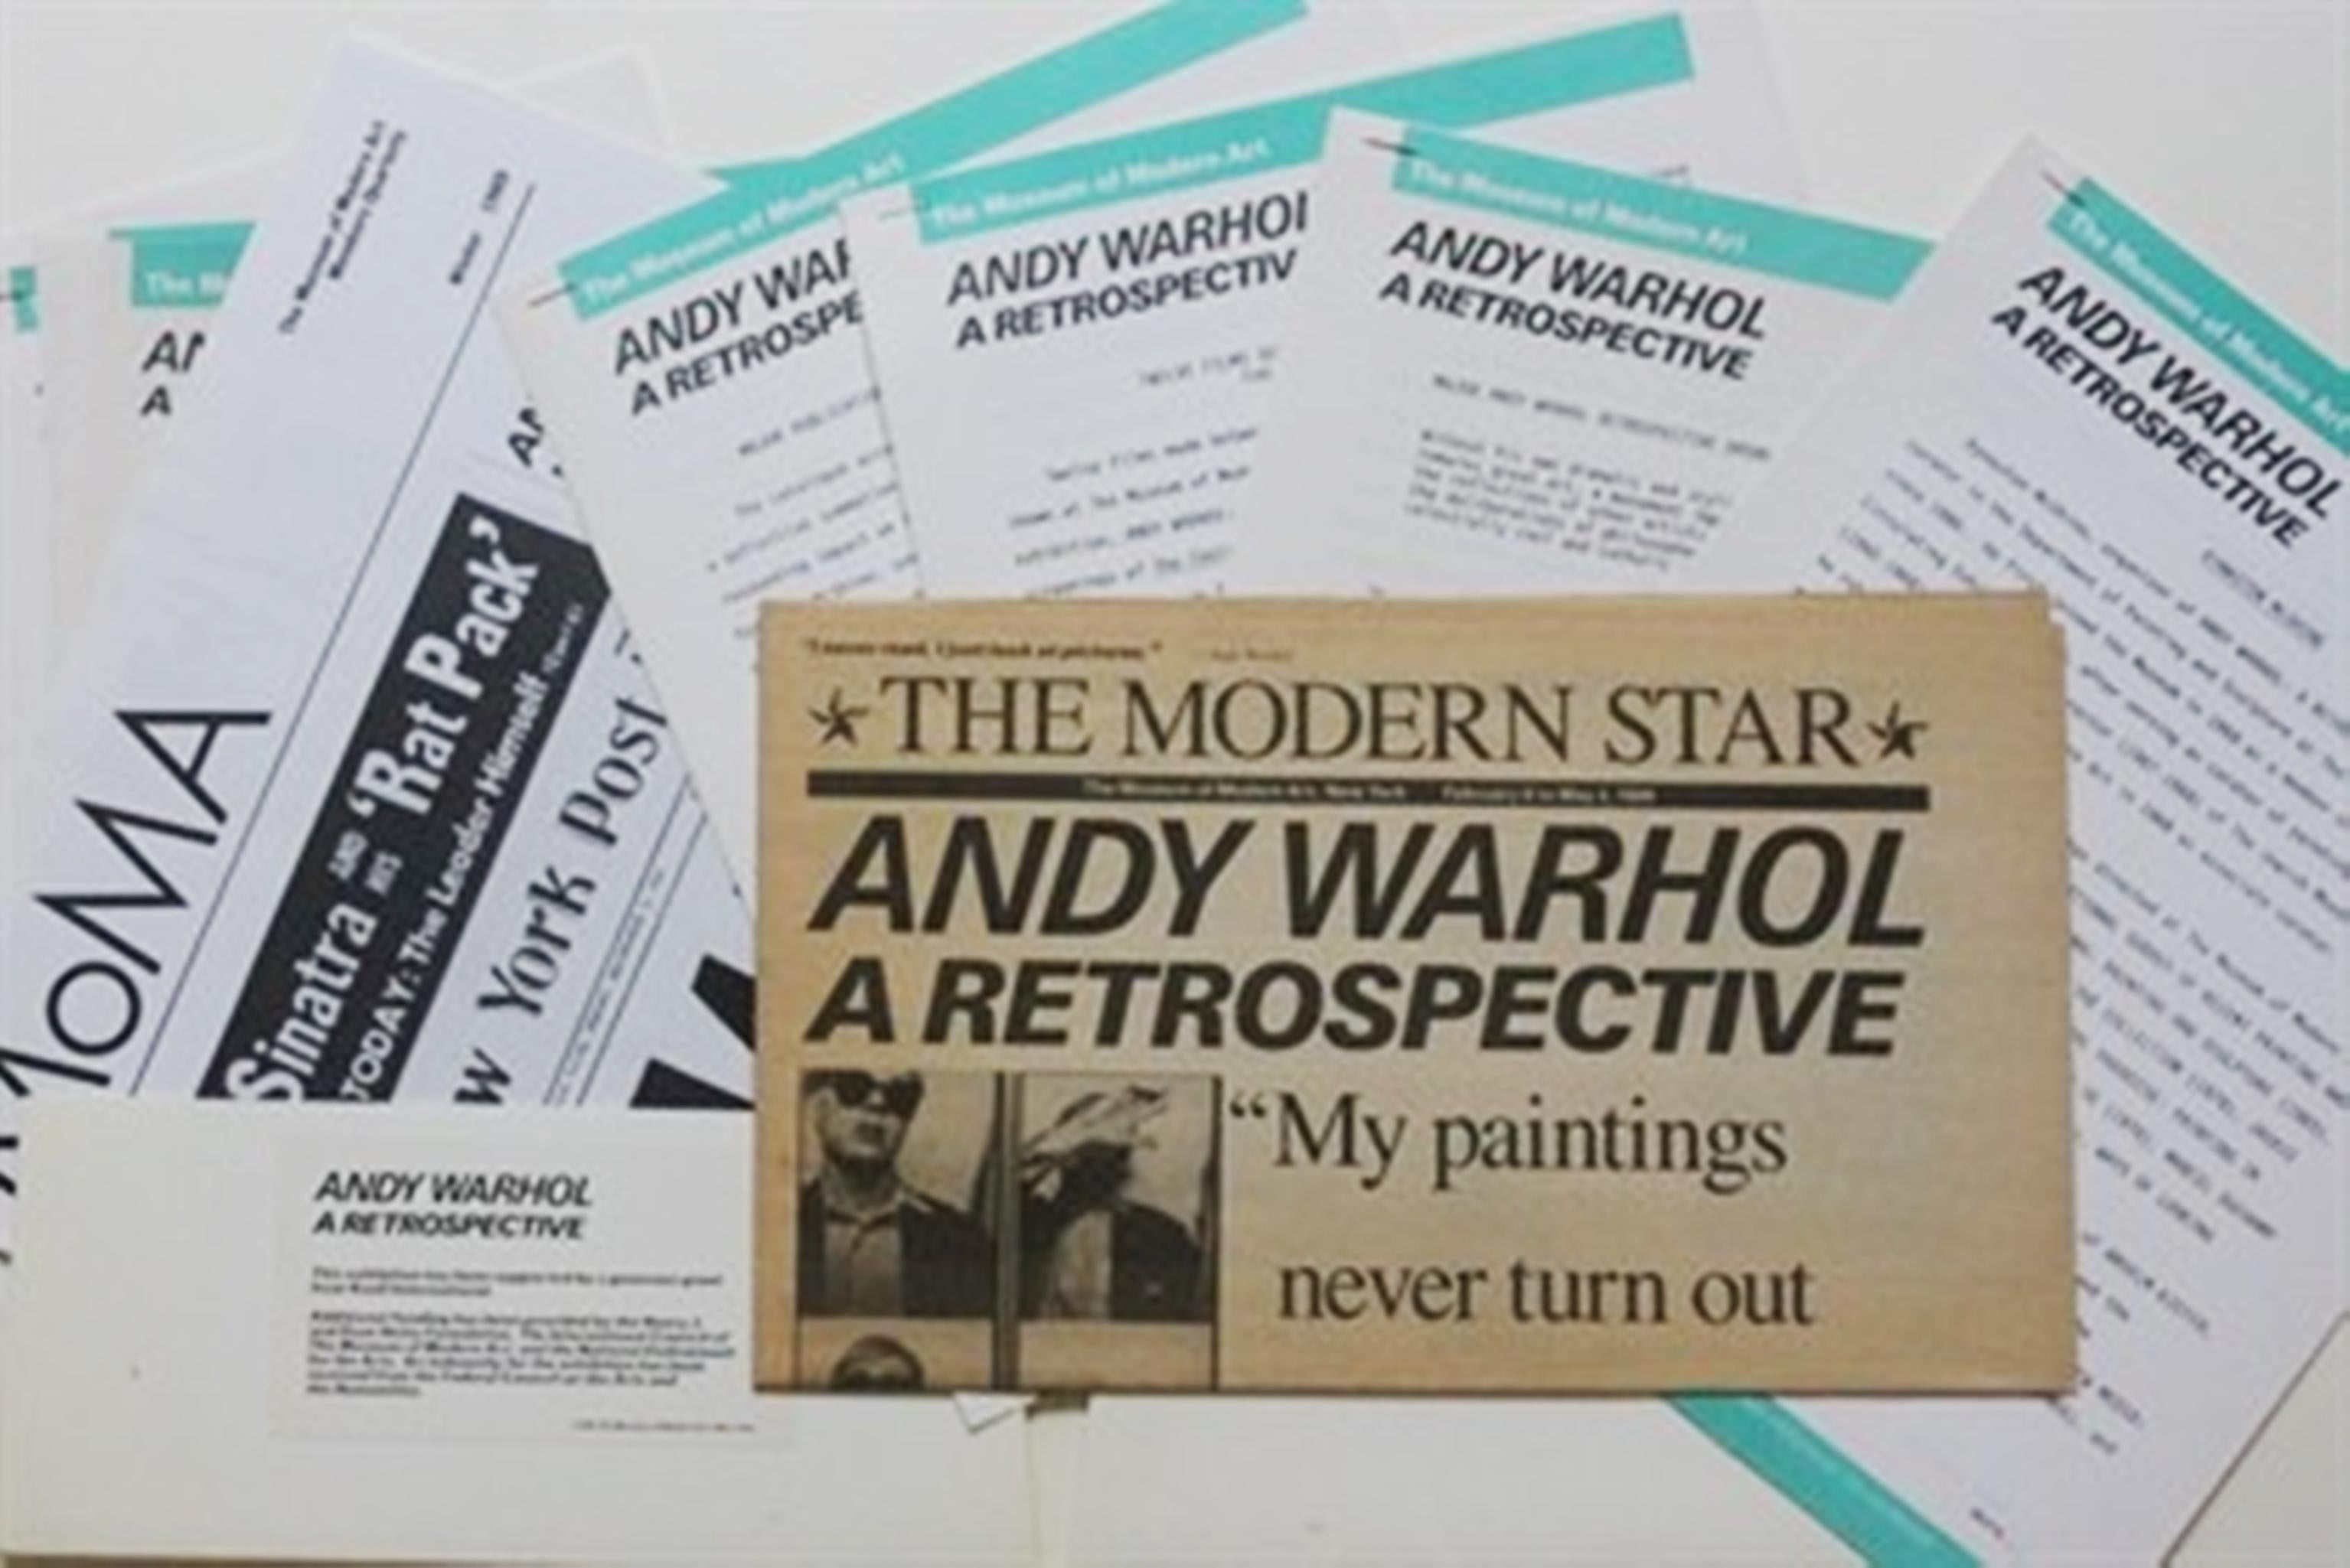 Vintage Museum Press Kit (MOMA)
Offset Lithograph brochures, press releases, magazines and a bookmark
12 x 9 inches
Unframed
Andy Warhol Retrospective, February 6 to May 2, 1989, the Museum of Modern Art
It was made available exclusively to the